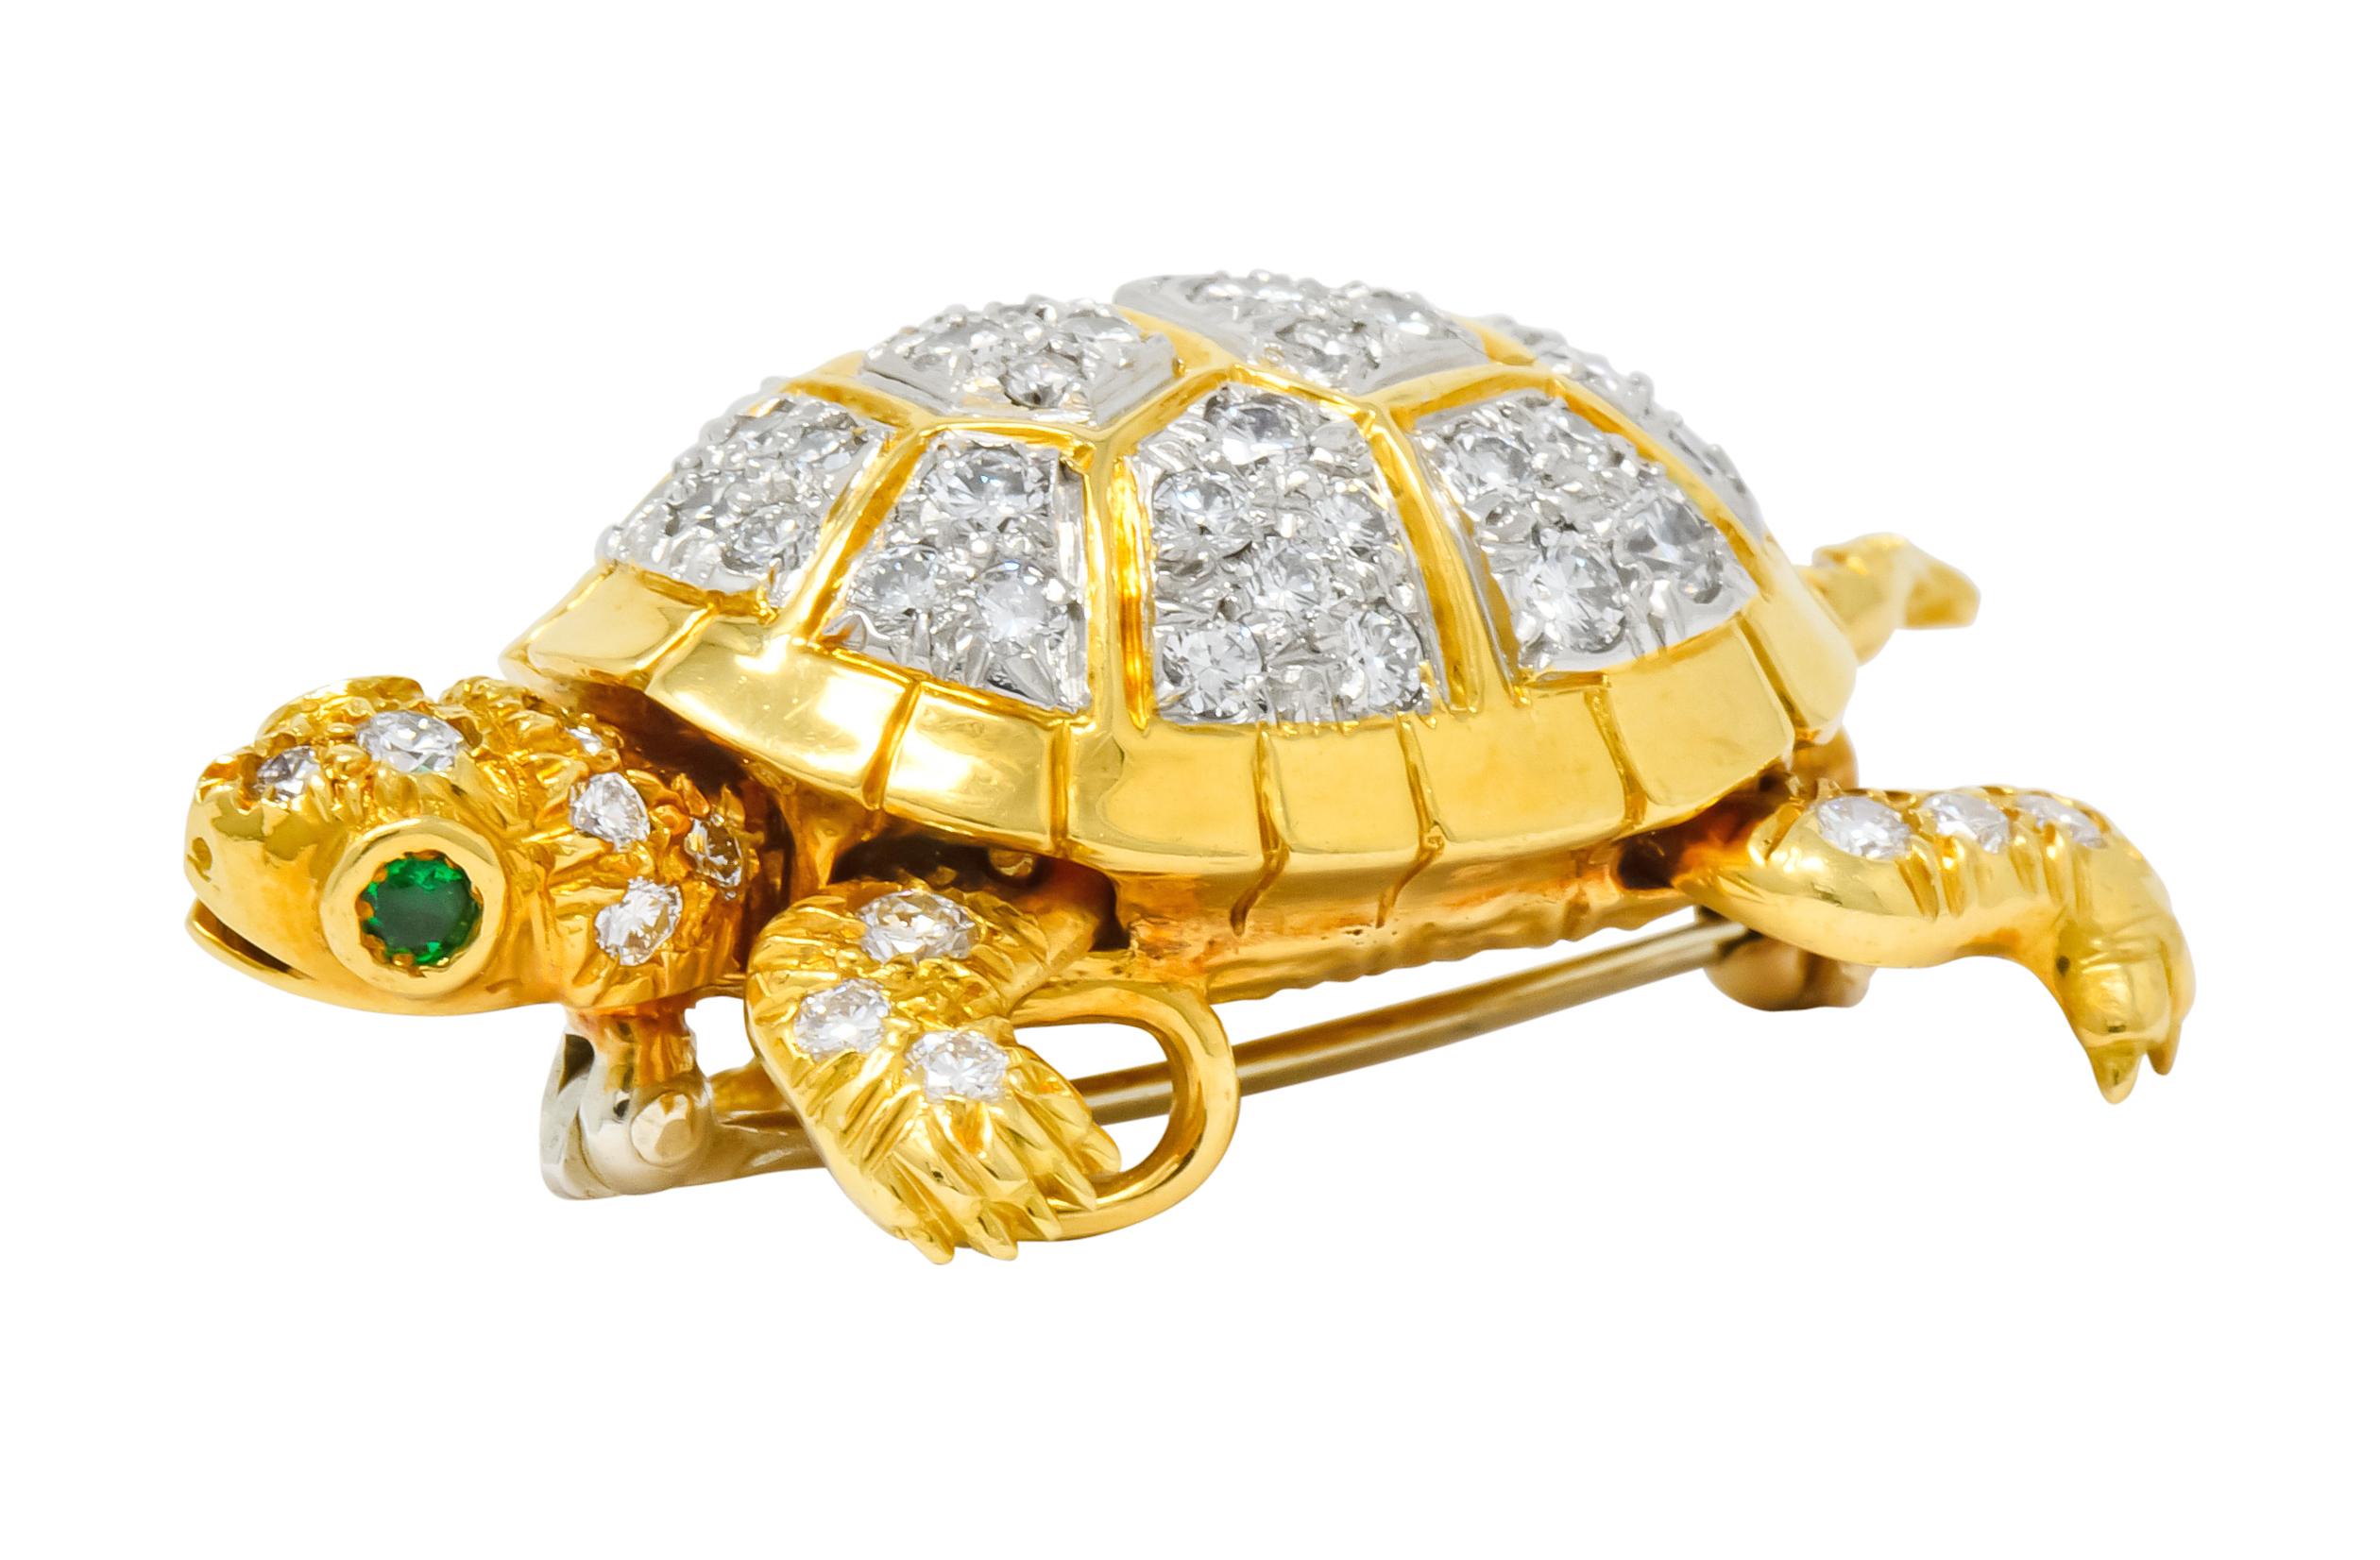 Pendant brooch designed as a turtle featuring articulated limbs and round cut emerald accents as eyes

Gold limbs and platinum-topped shell are bead set throughout by round brilliant cut diamonds weighing approximately 2.20 carats total; G/H color